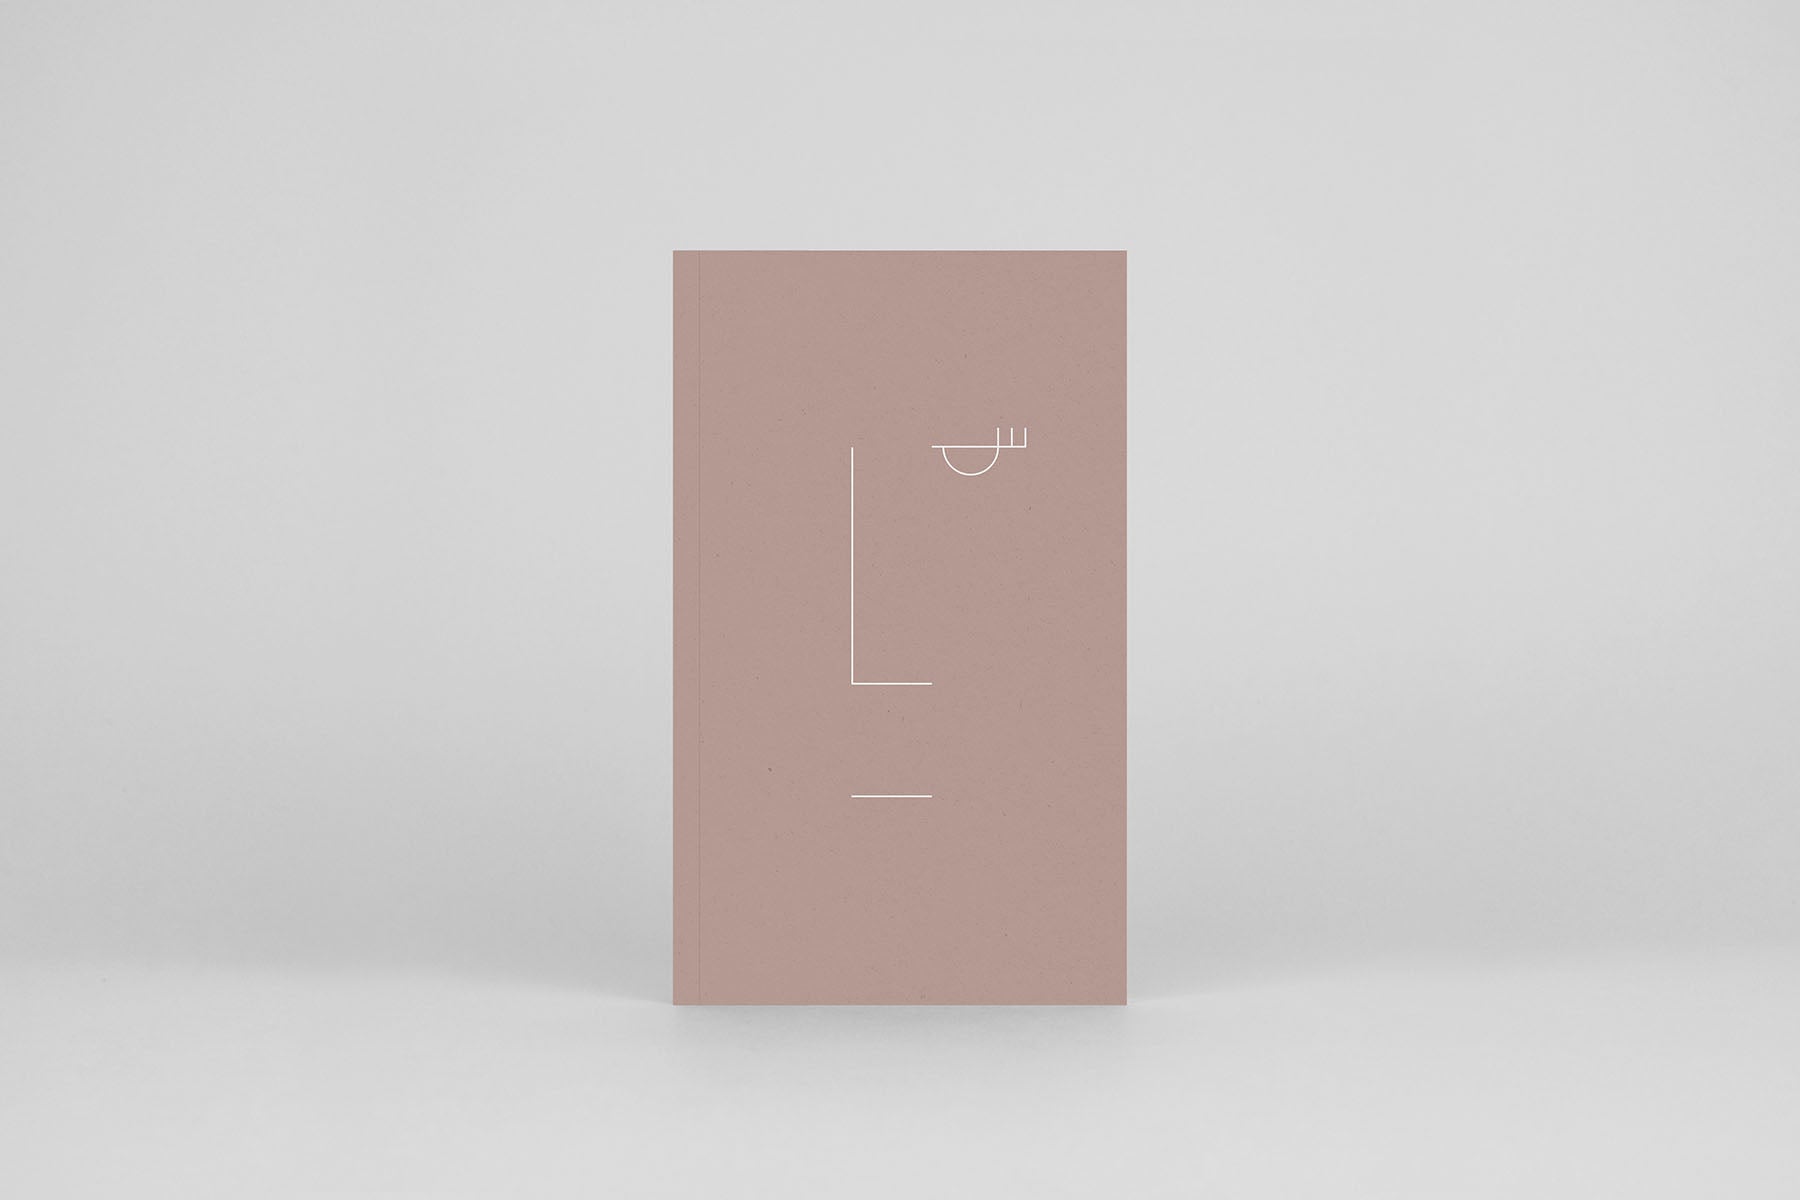 Lico Notizbuch - almond pink blank - a simple story